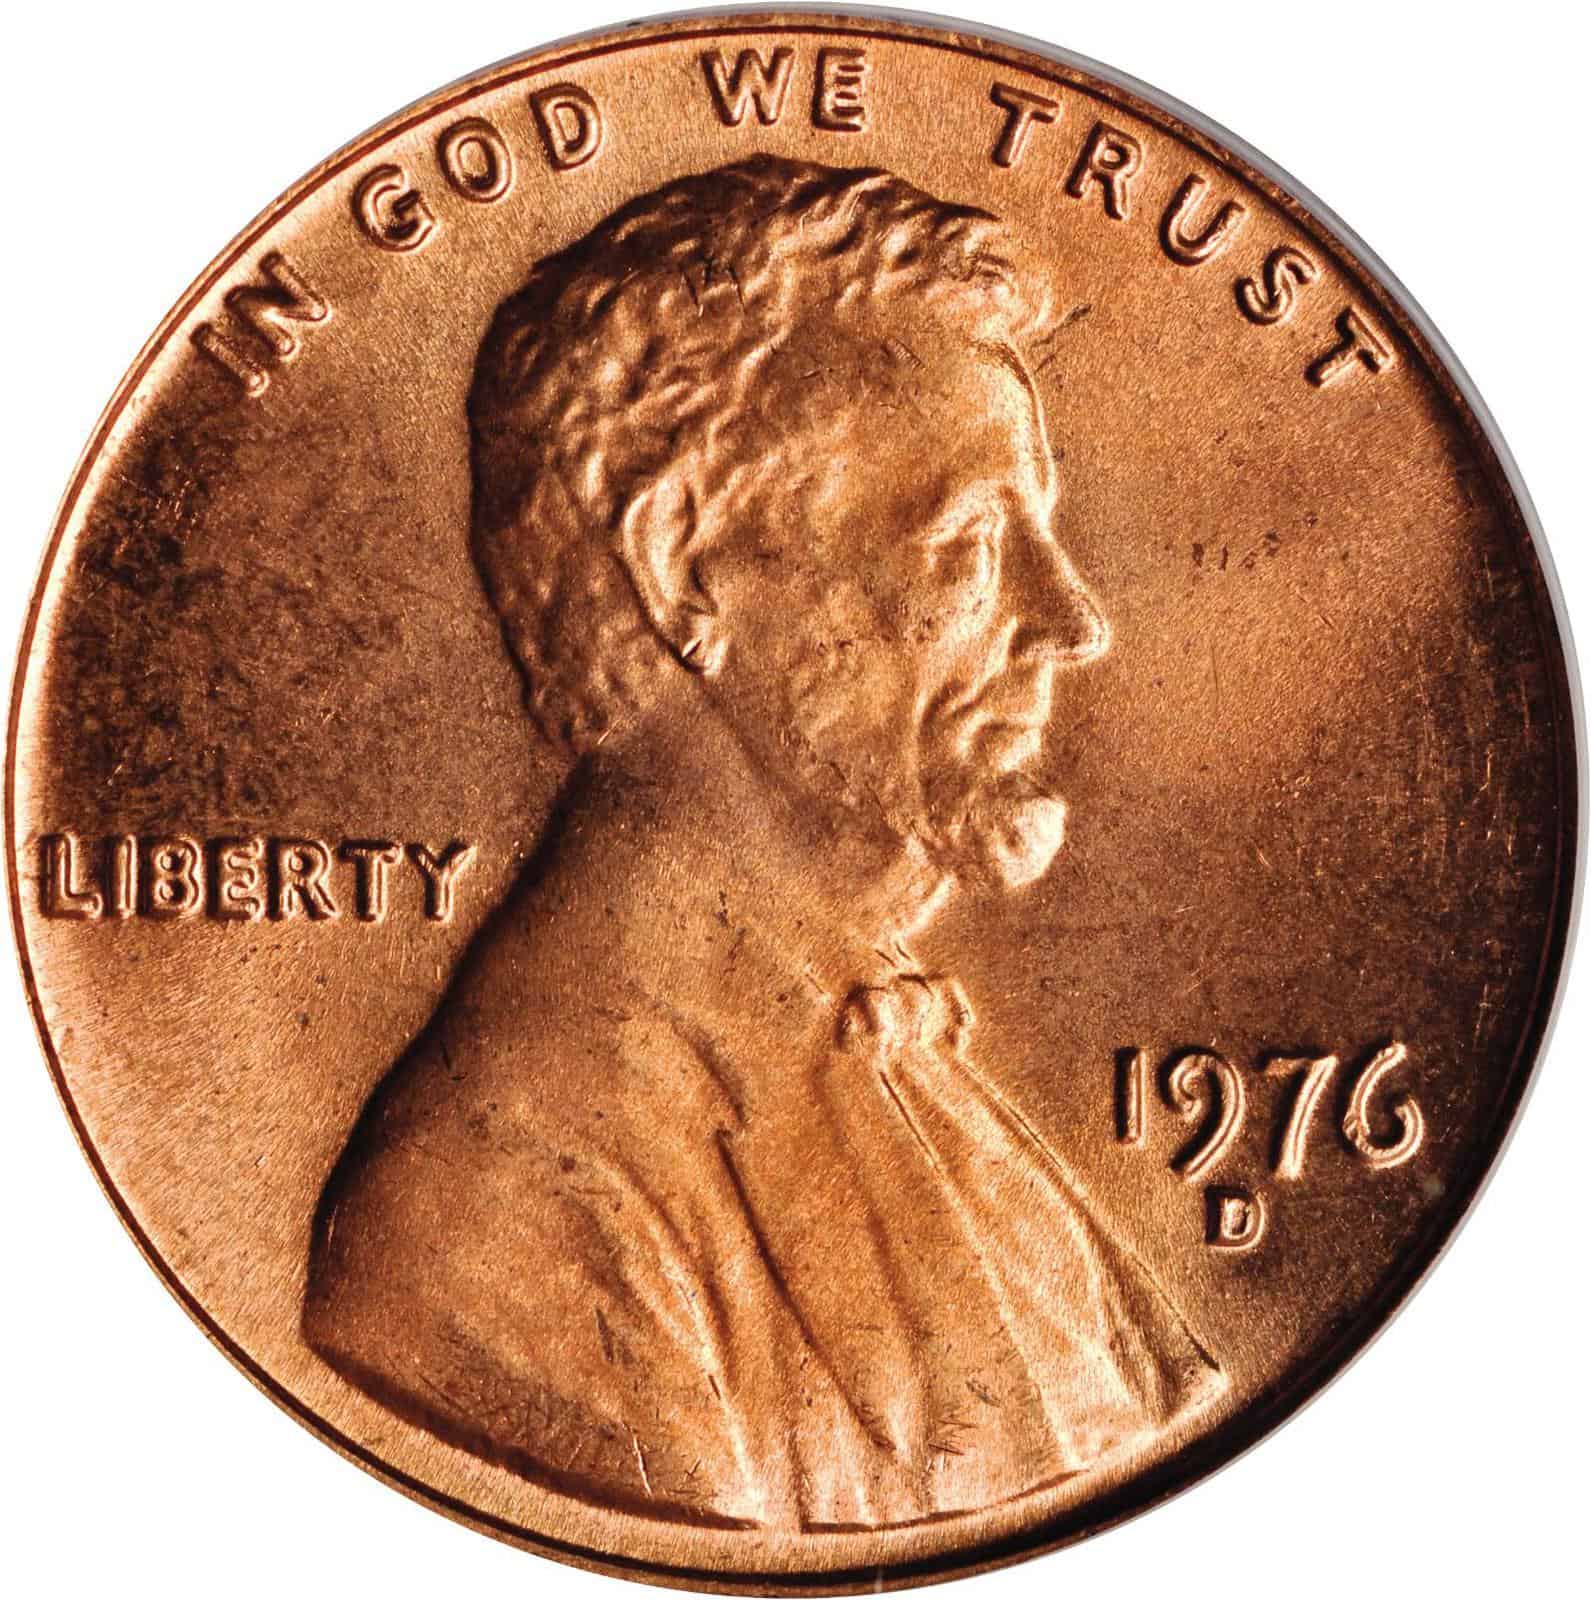 The Obverse of the 1976 Penny